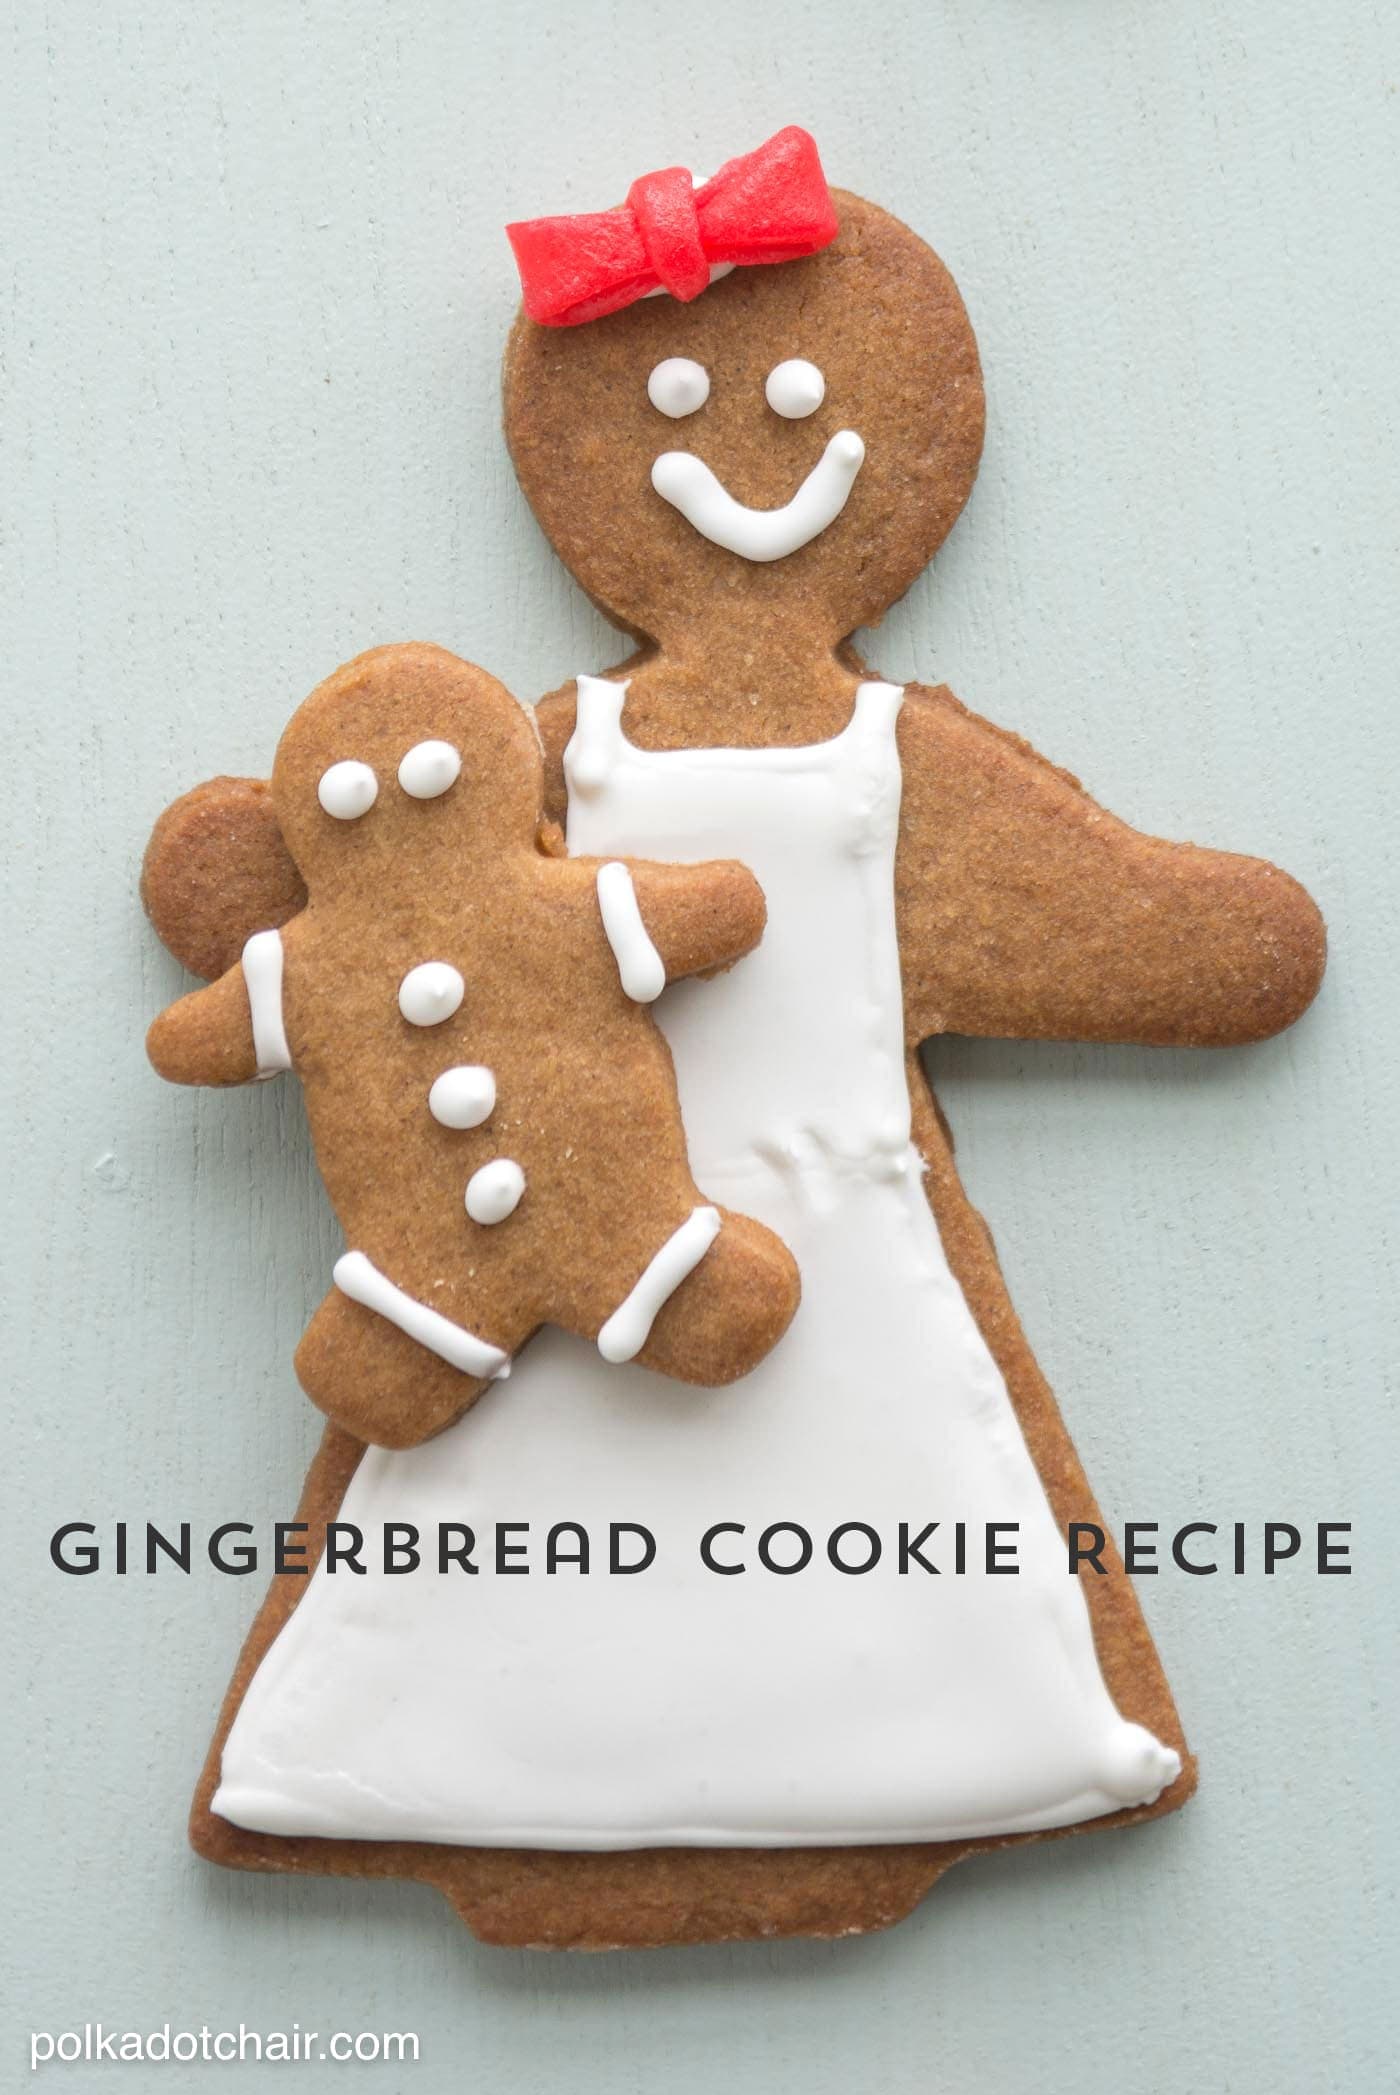 Our Favorite Gingerbread Cookie Recipe